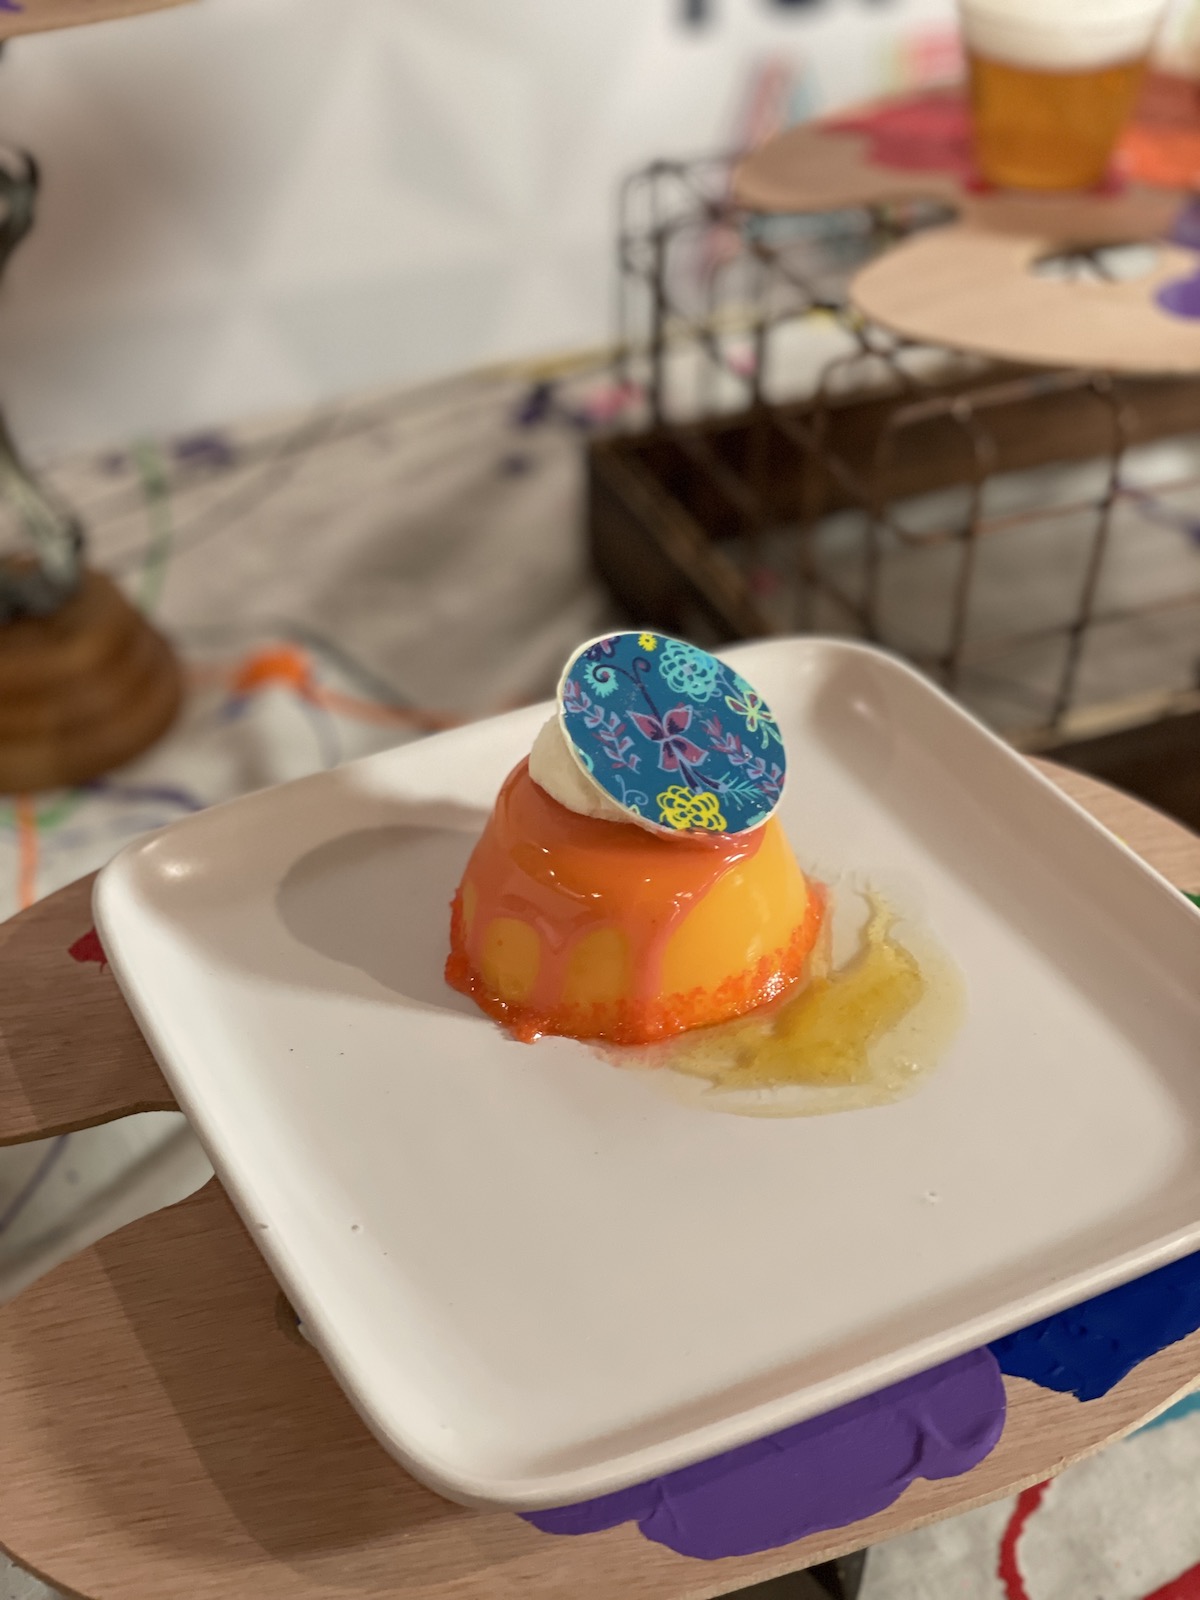 Passionfruit dessert at Epcot Festival of the Arts 2022.